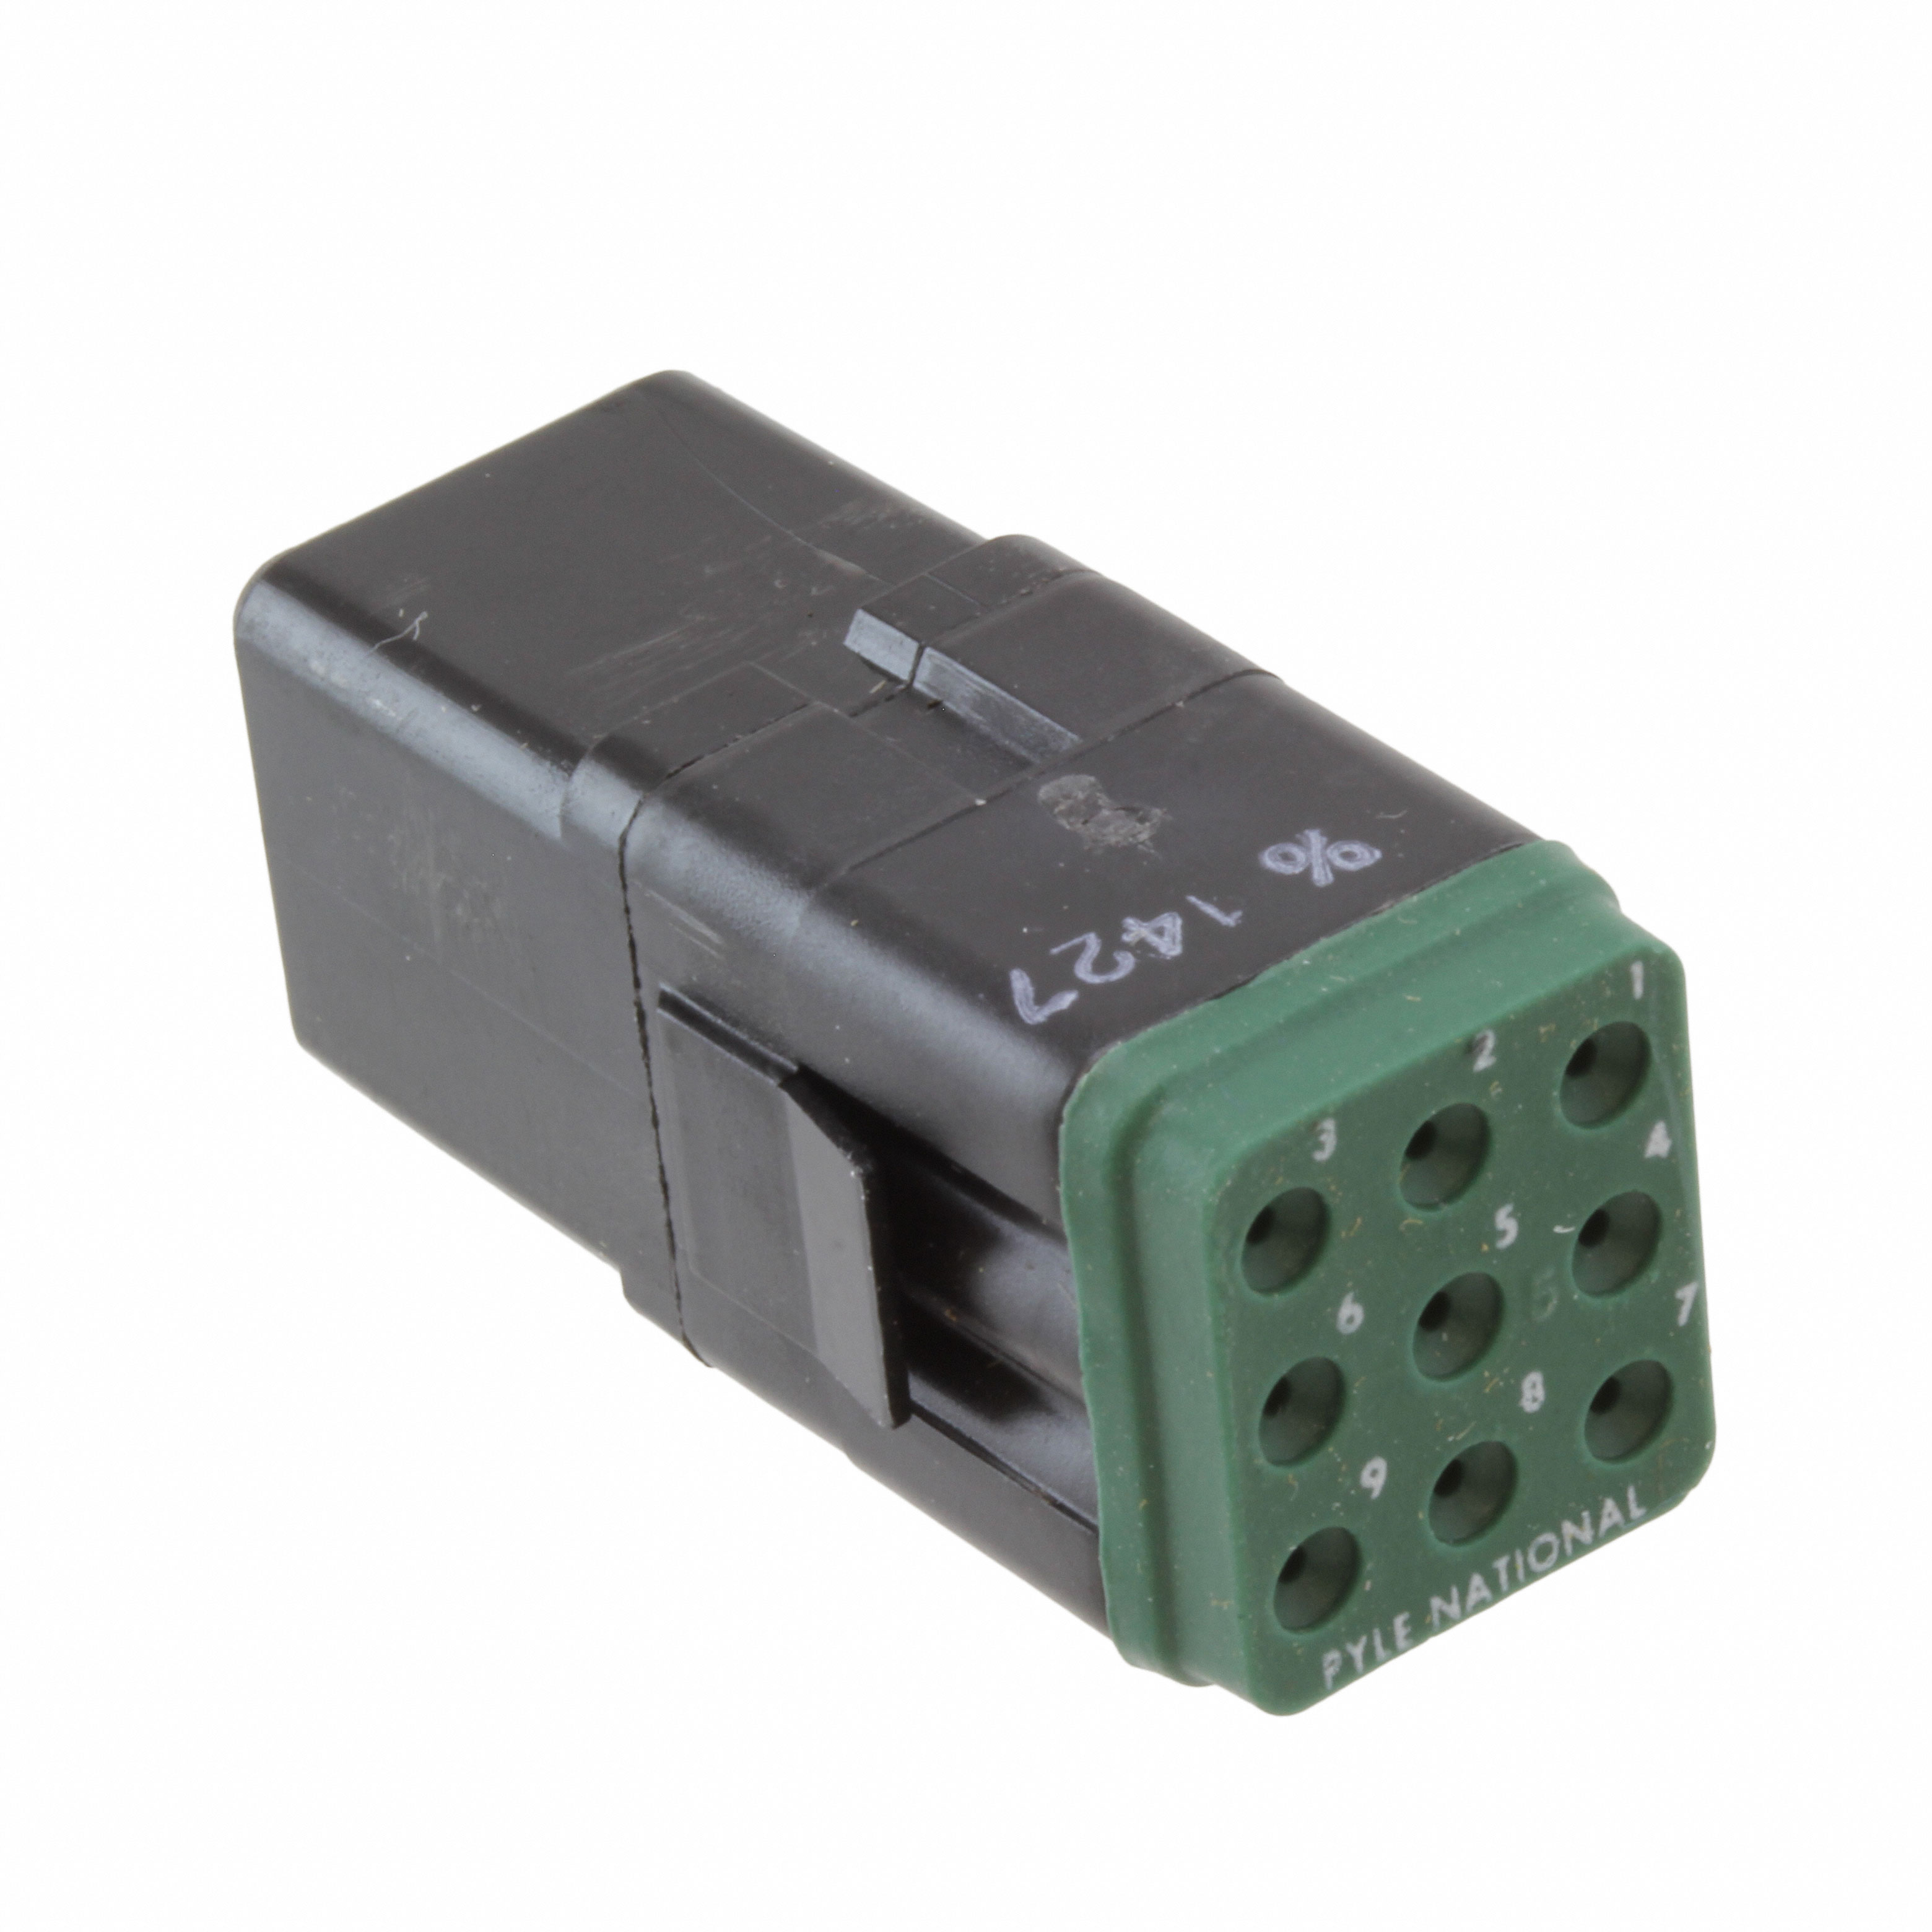 the part number is LMD-4001-S